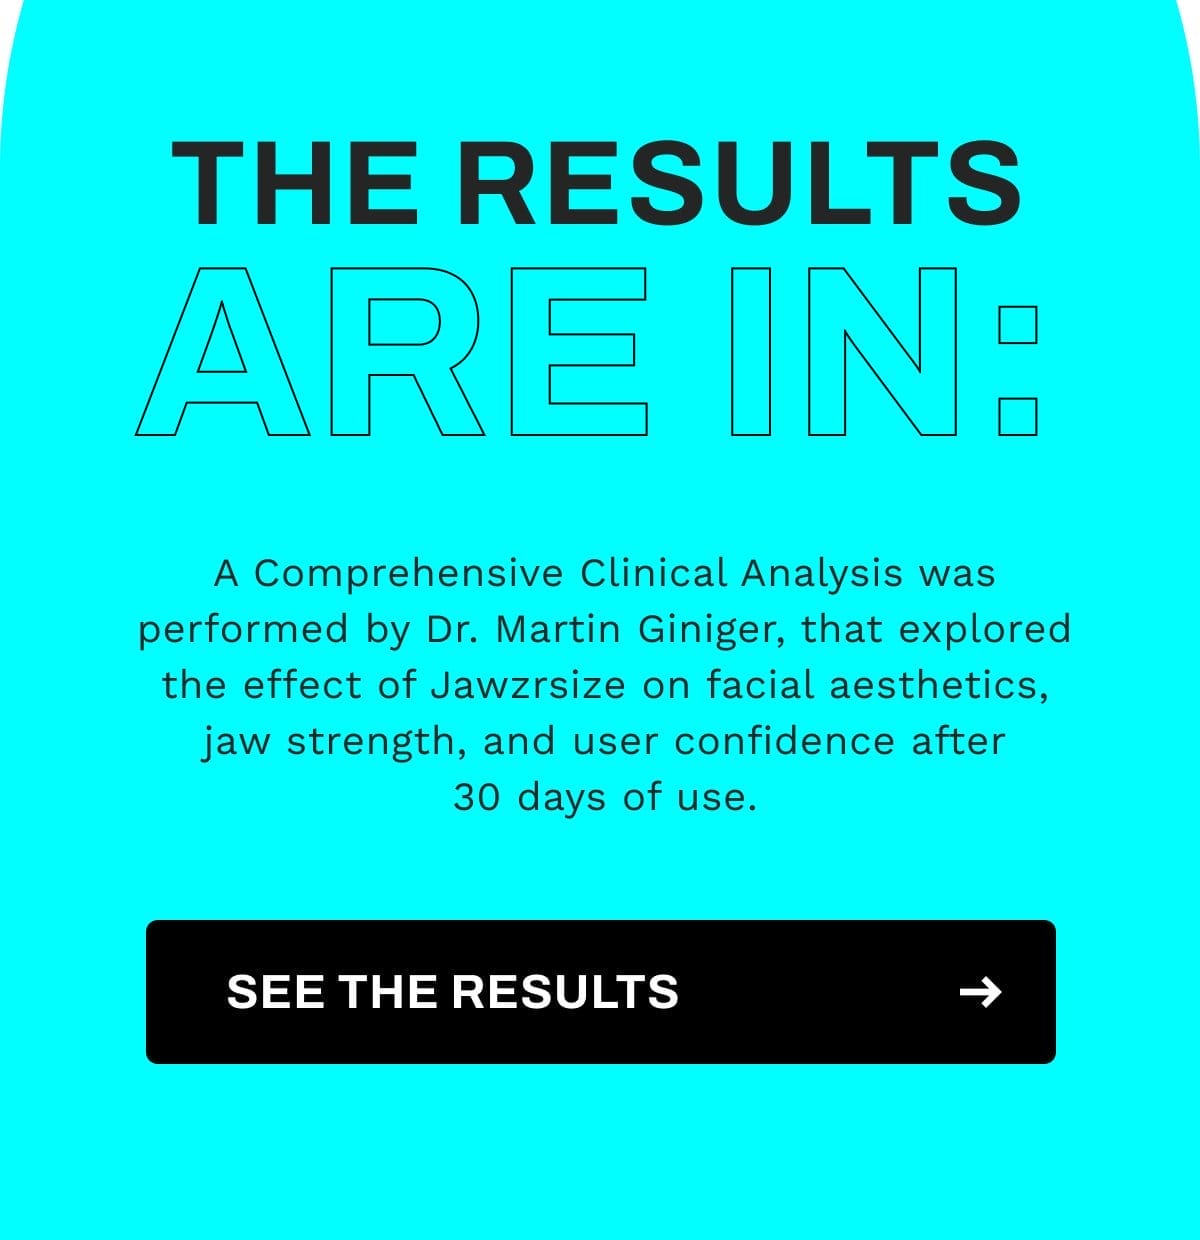 A Comprehensive Clinical Analysis was performed by Dr. Martin Giniger, that explored the effect of Jawzrsize on facial aesthetics, jaw strength, and user confidence after 30 days of use.